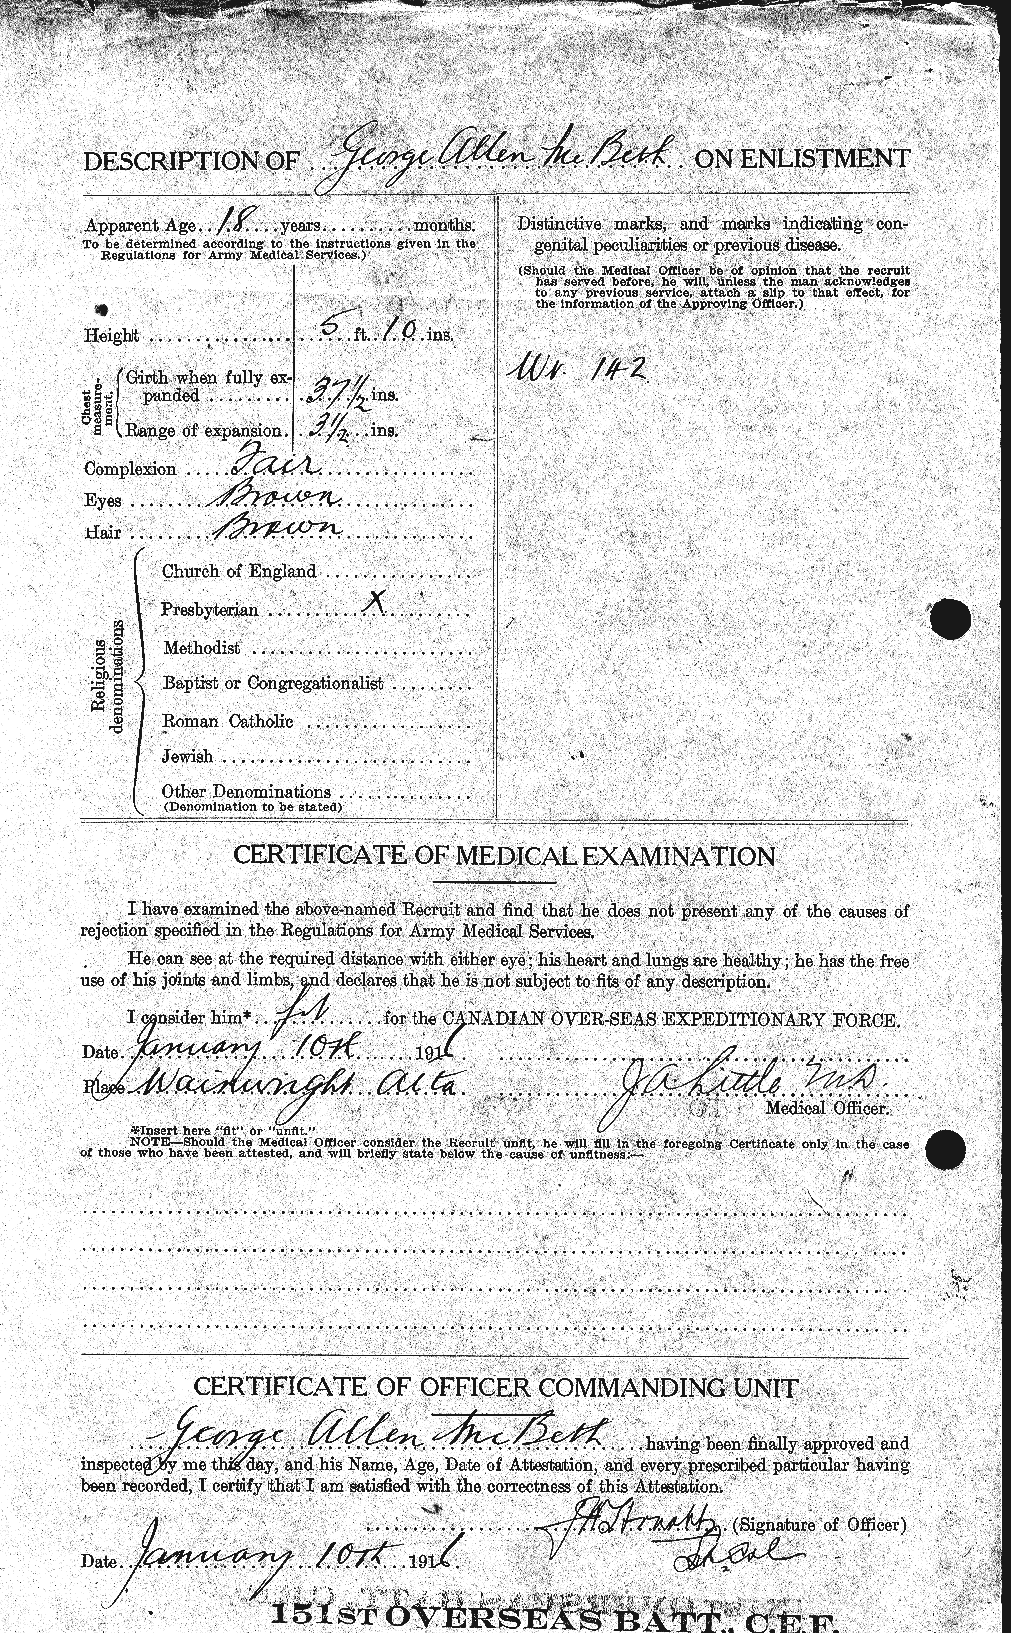 Personnel Records of the First World War - CEF 132124b